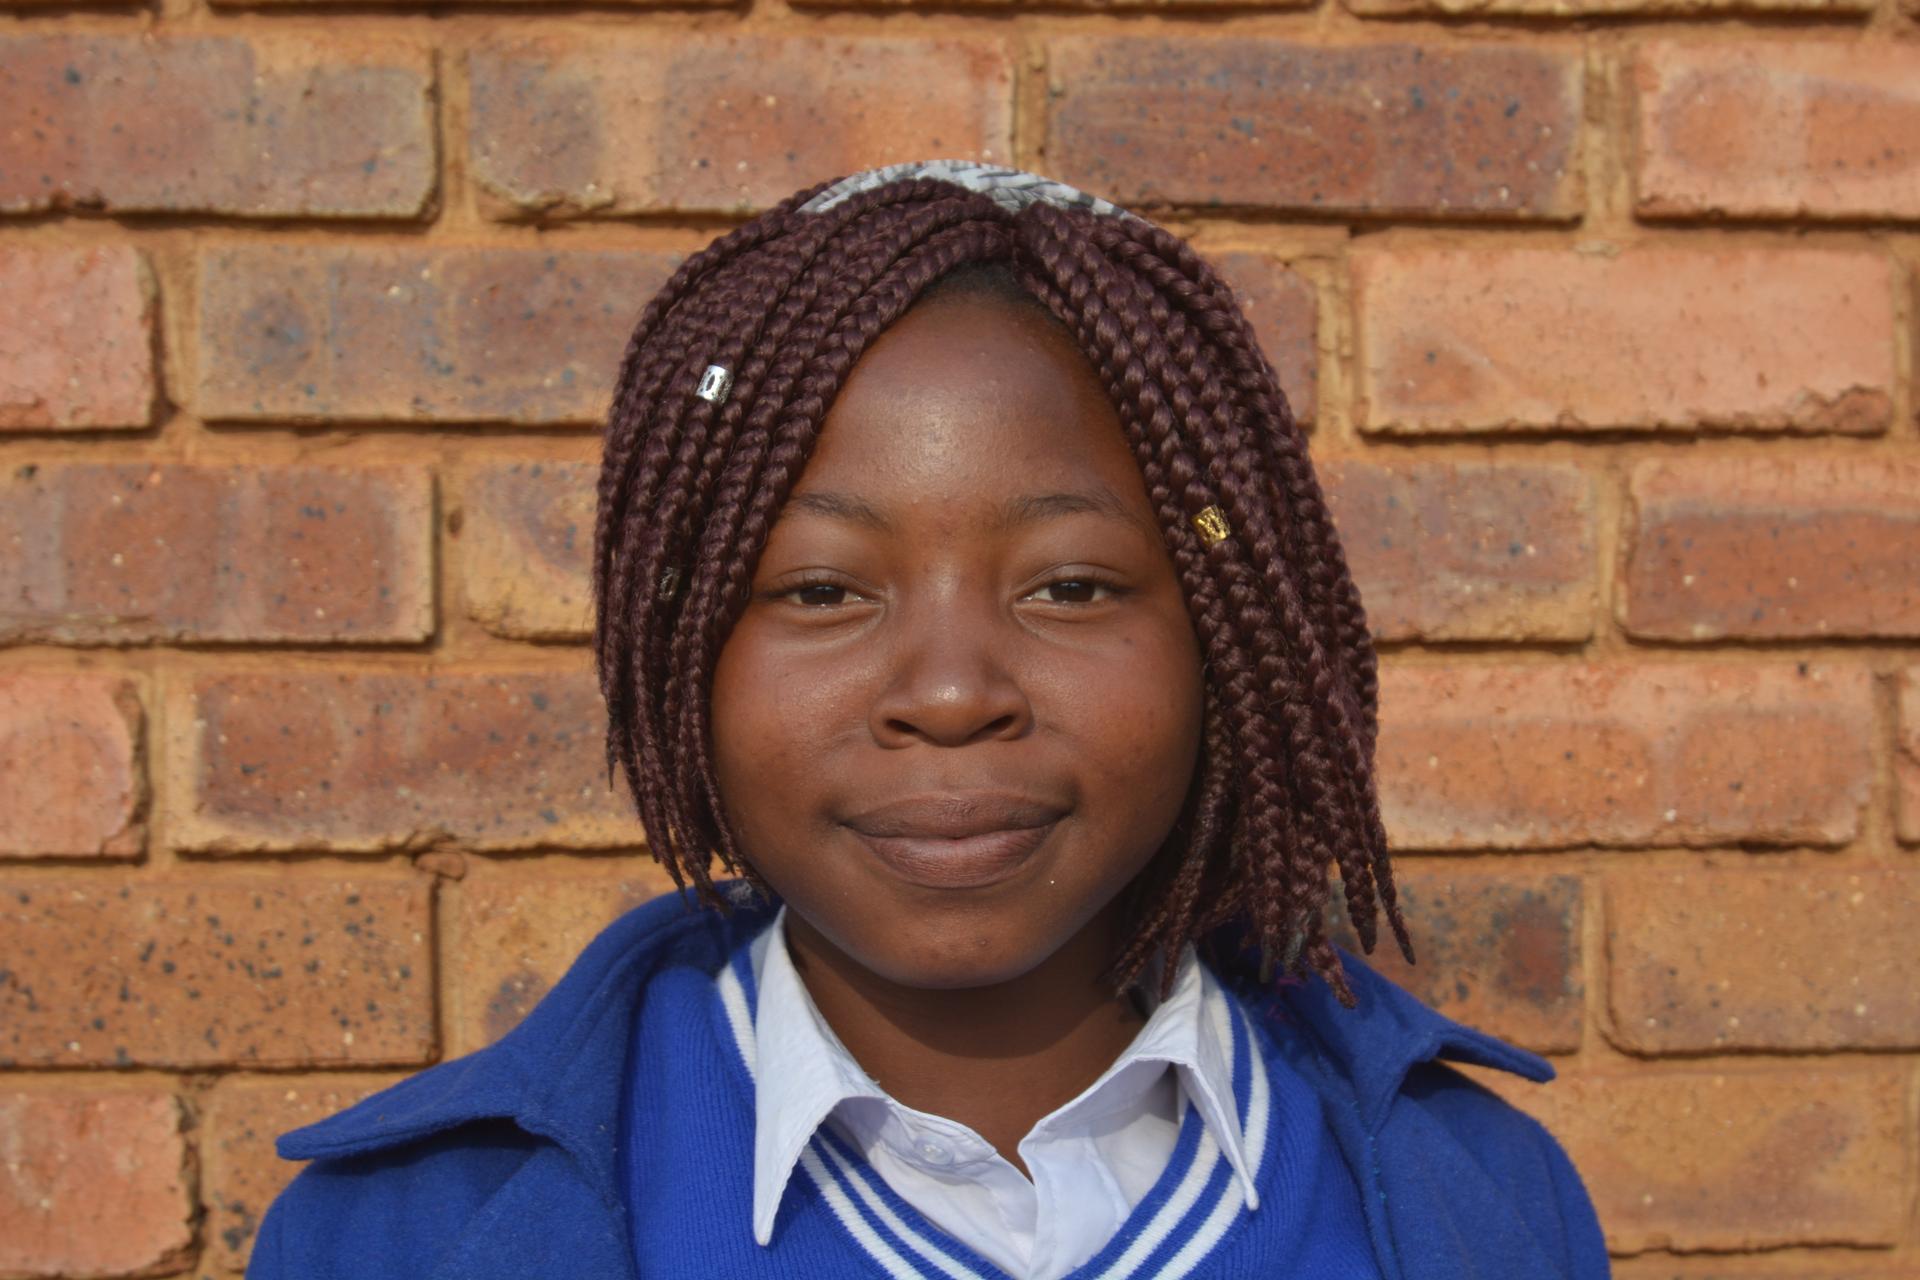 Close-up of the face of Nhlanhla, an HIV positive teen mom in South Africa.